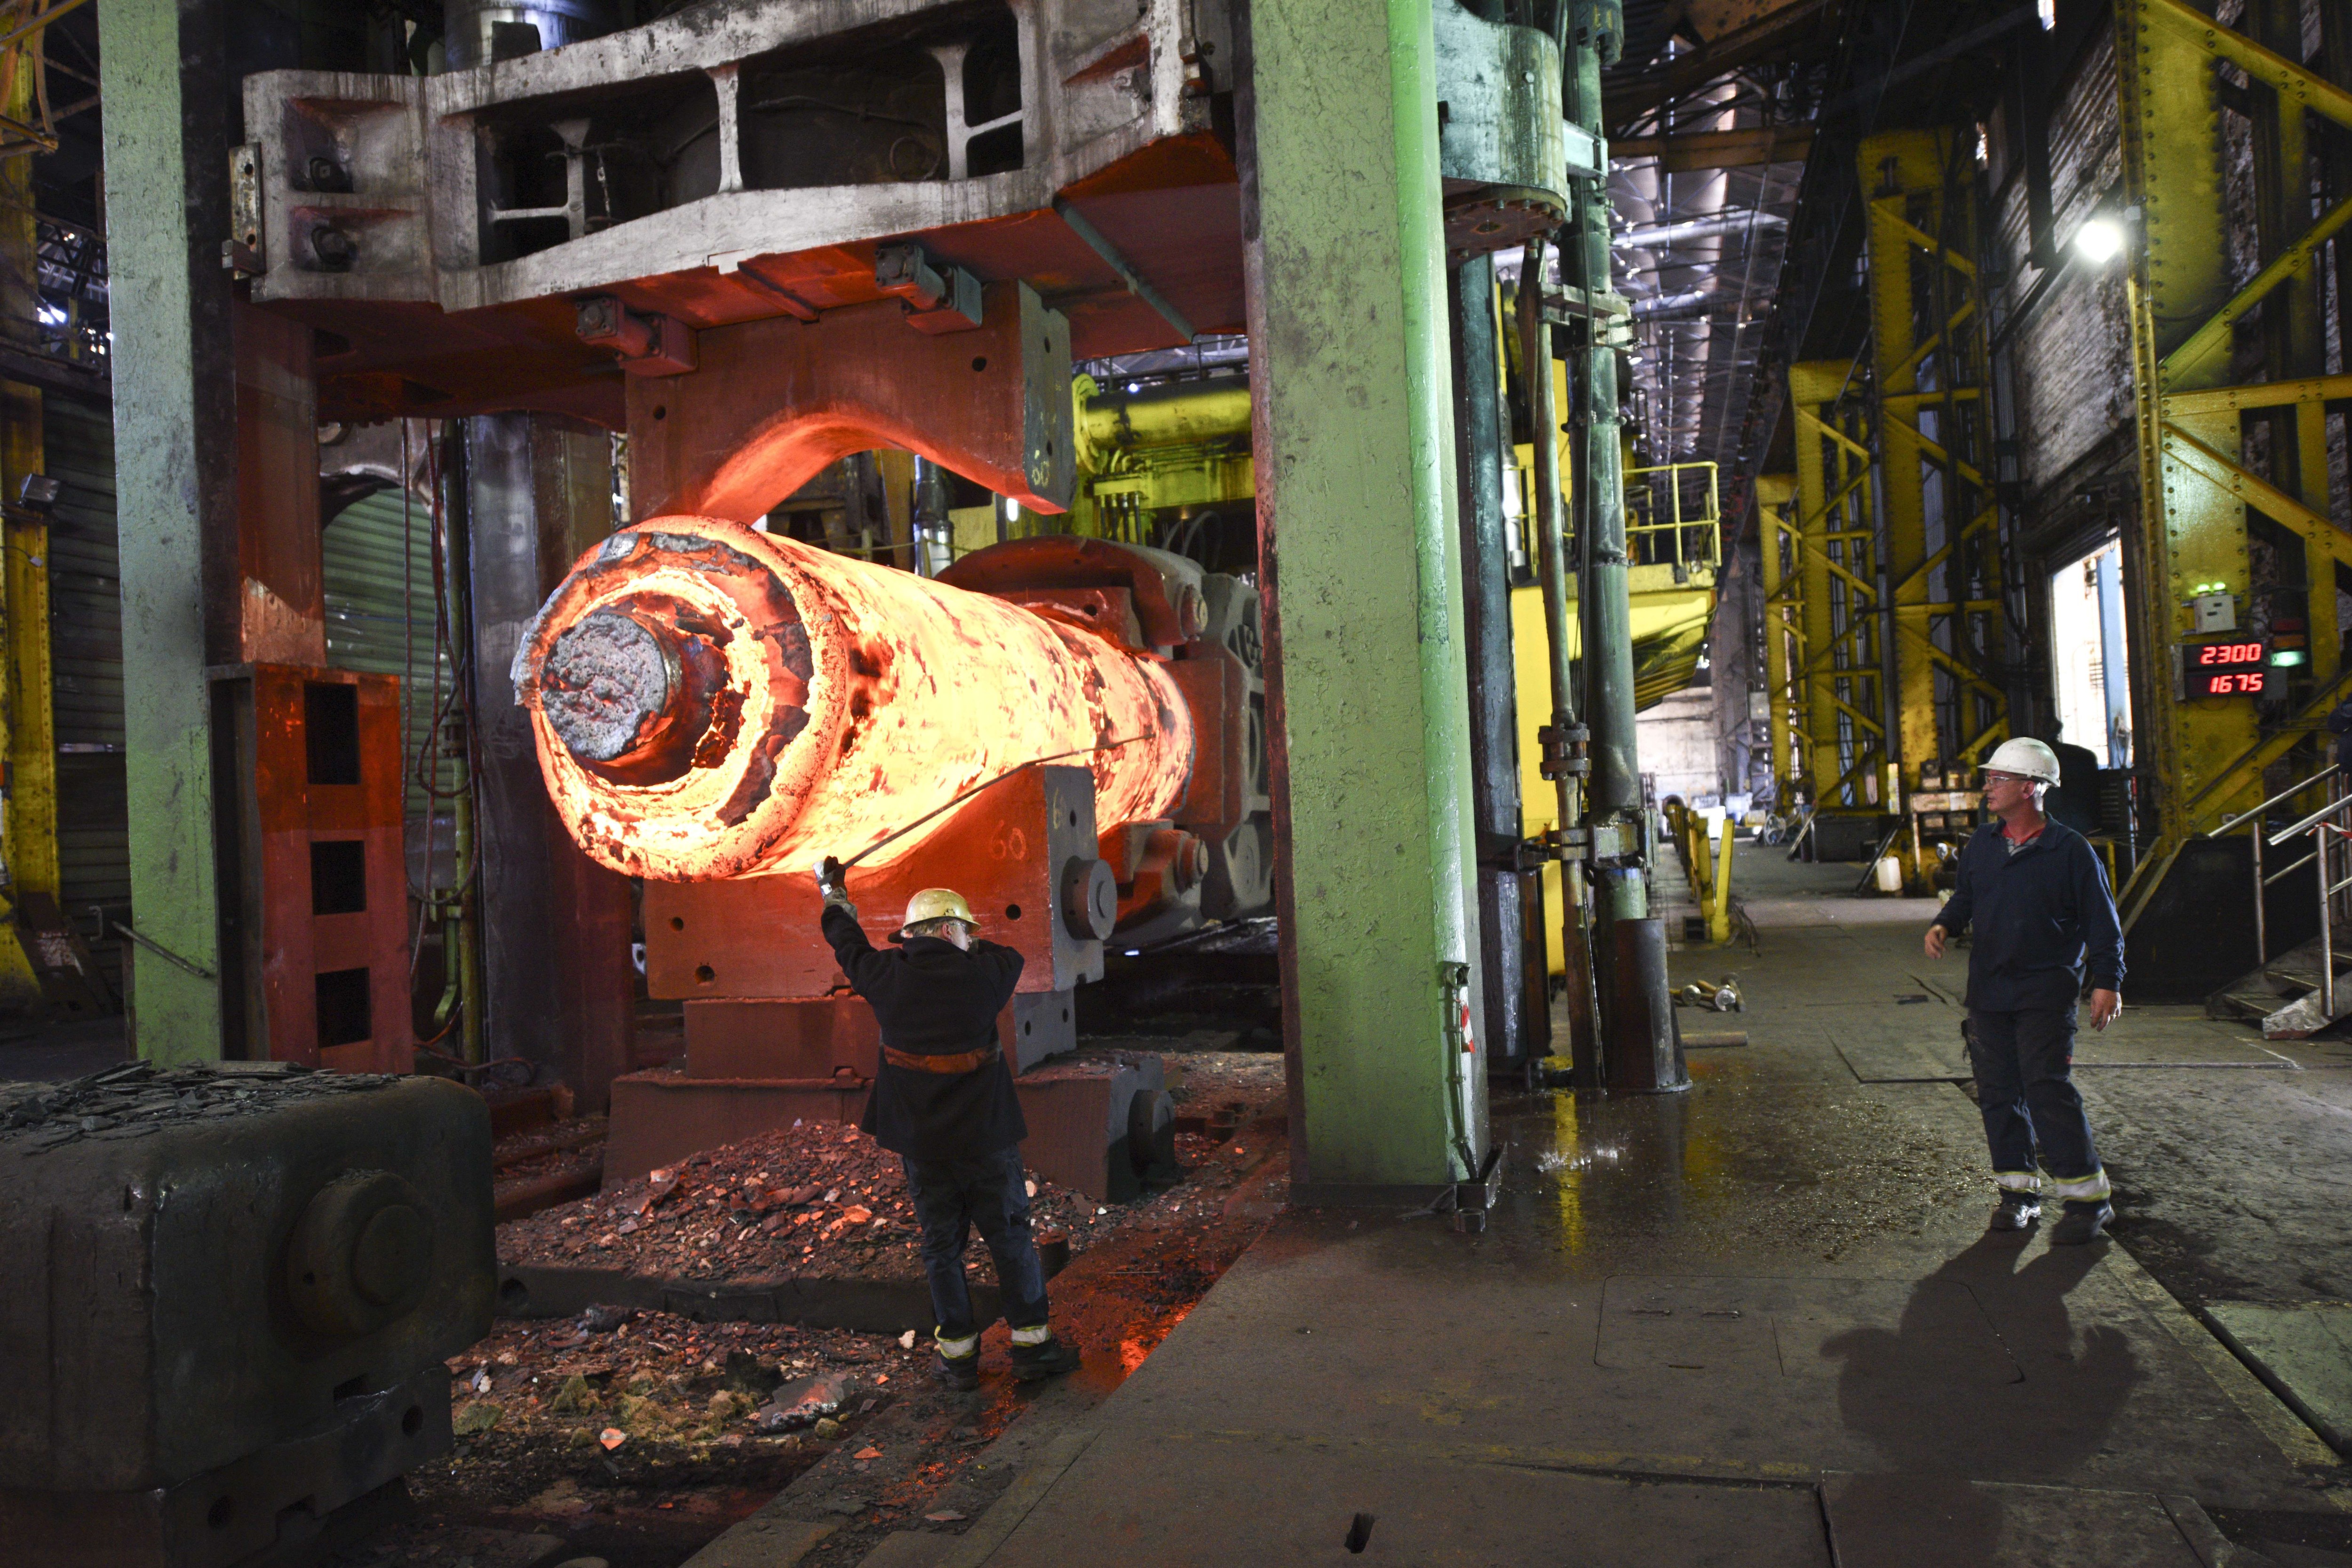 Sheffield Forgemasters produces a wide range of large-scale steel products